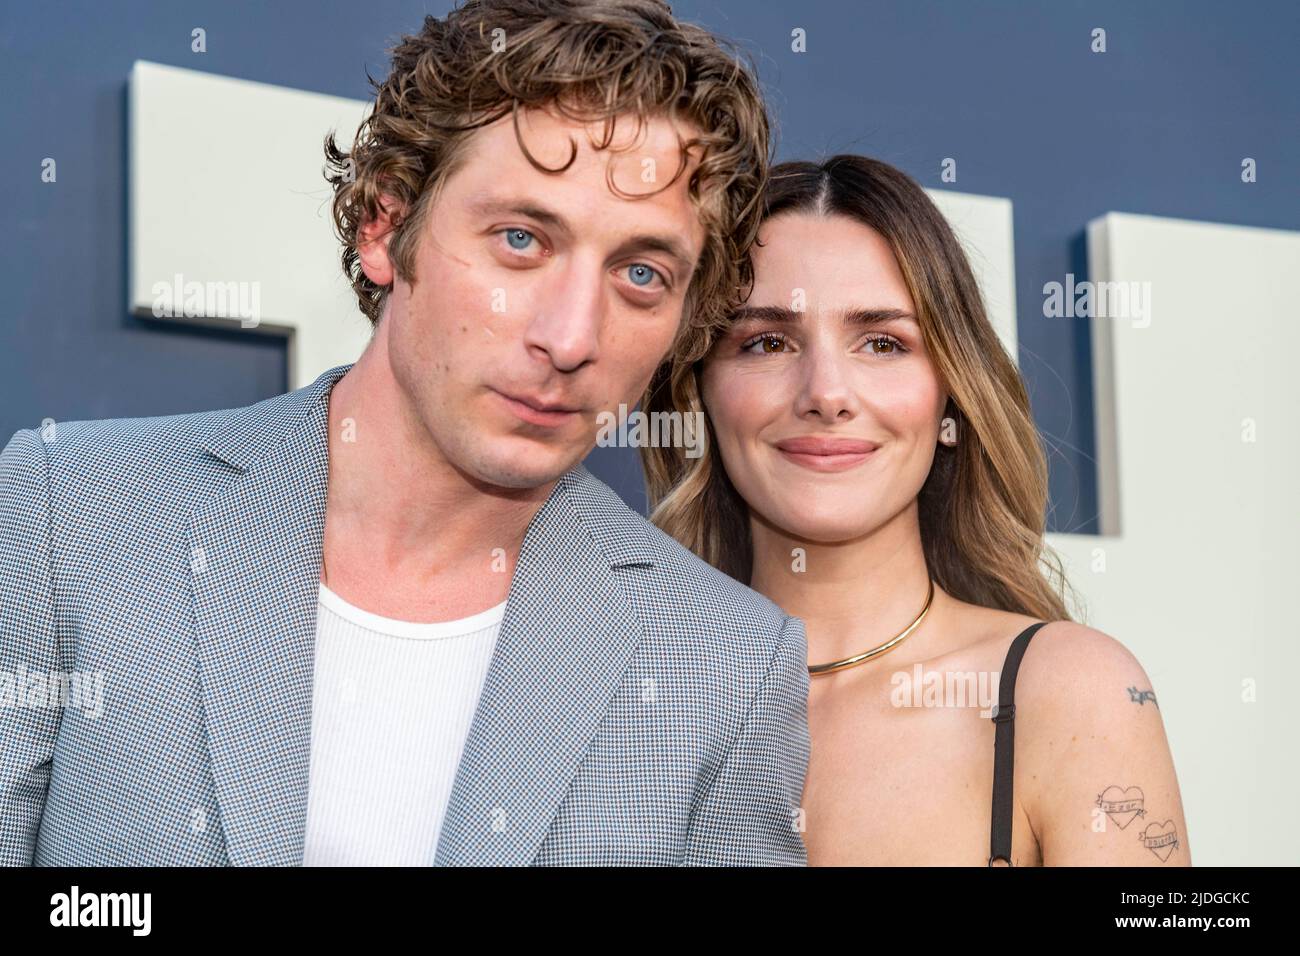 Hollywood, CA on June 20, 2022, Jeremy Allen White with wife actress Addison Timlin attends Premiere of FX's 'The Bear' at Goya Studios, Hollywood, CA on June 20, 2022 Stock Photo